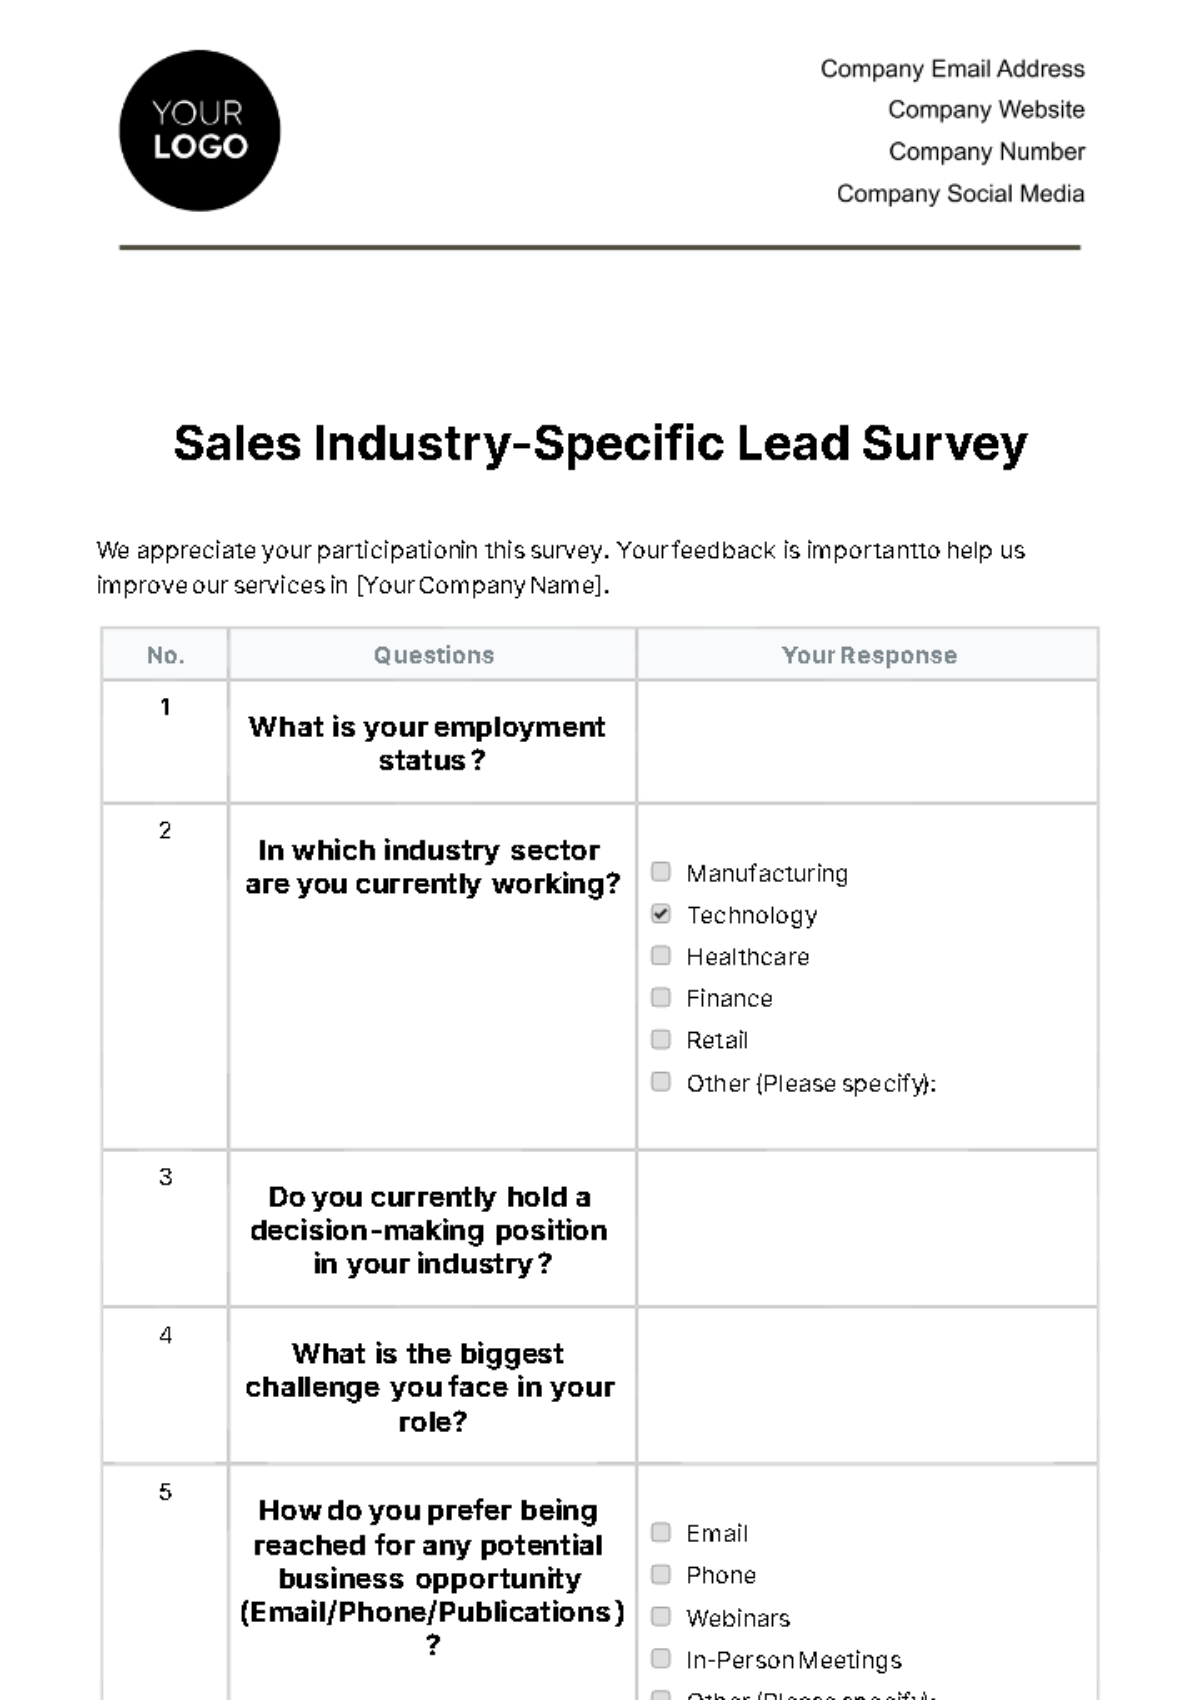 Free Sales Industry-Specific Lead Survey Template